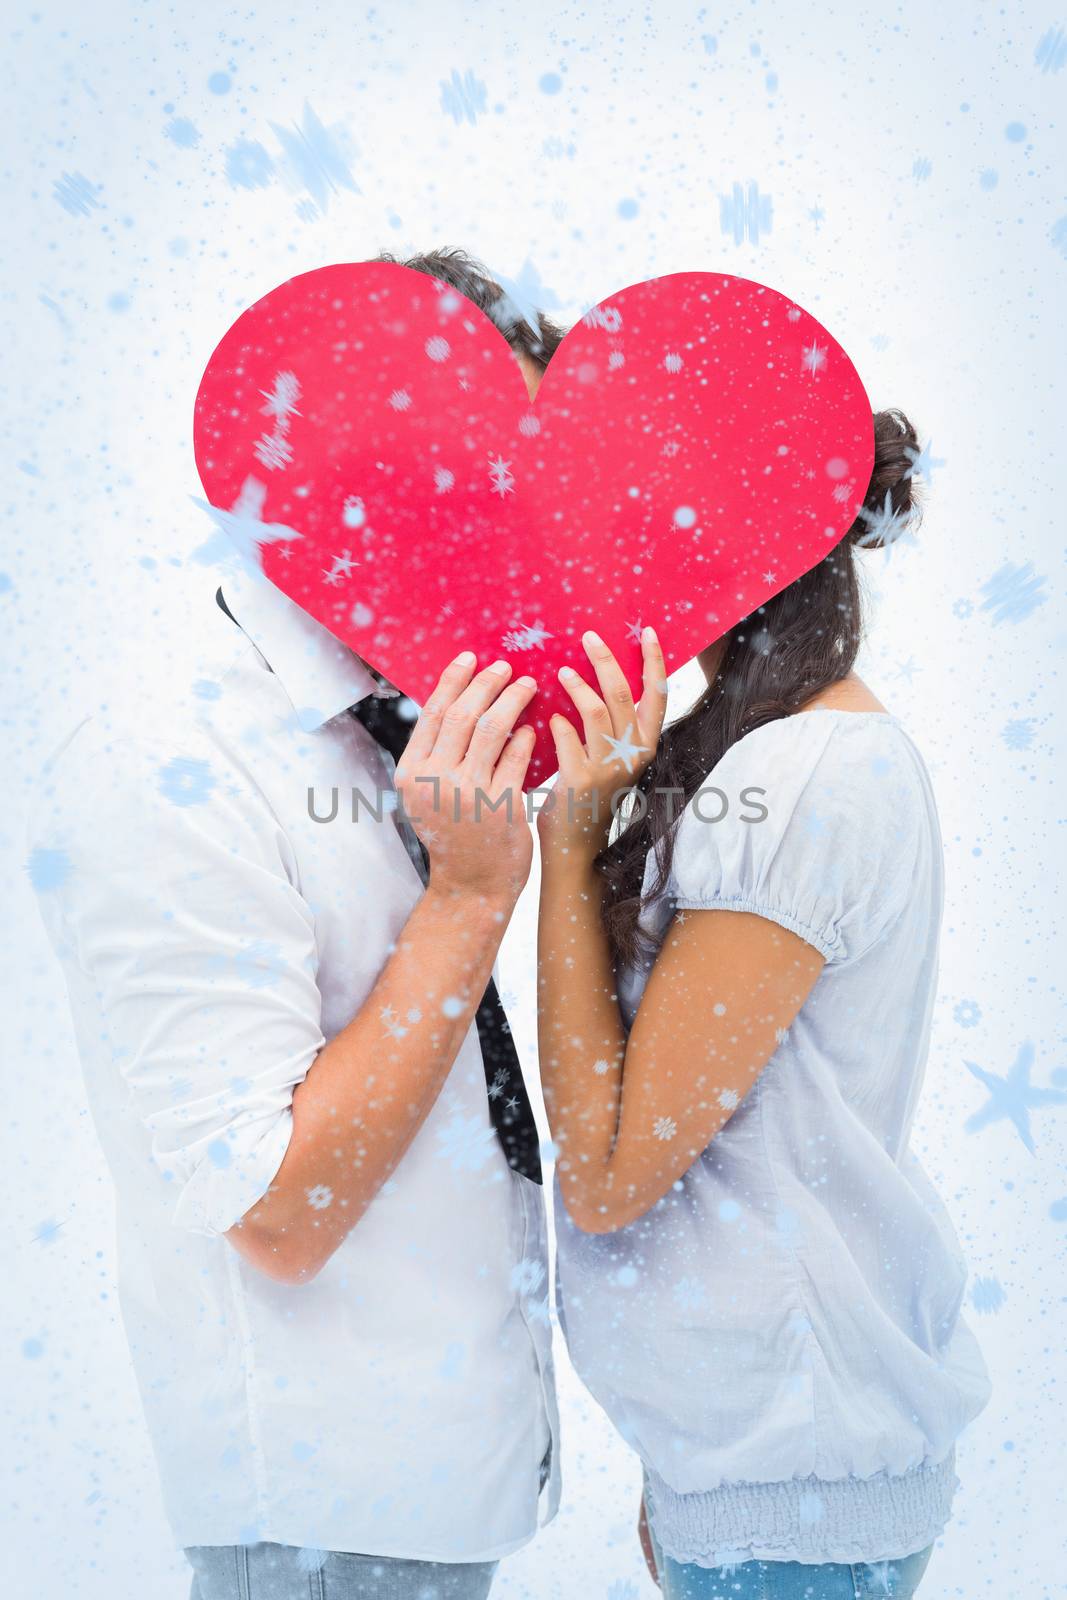 Couple covering their kiss with a heart against snow falling